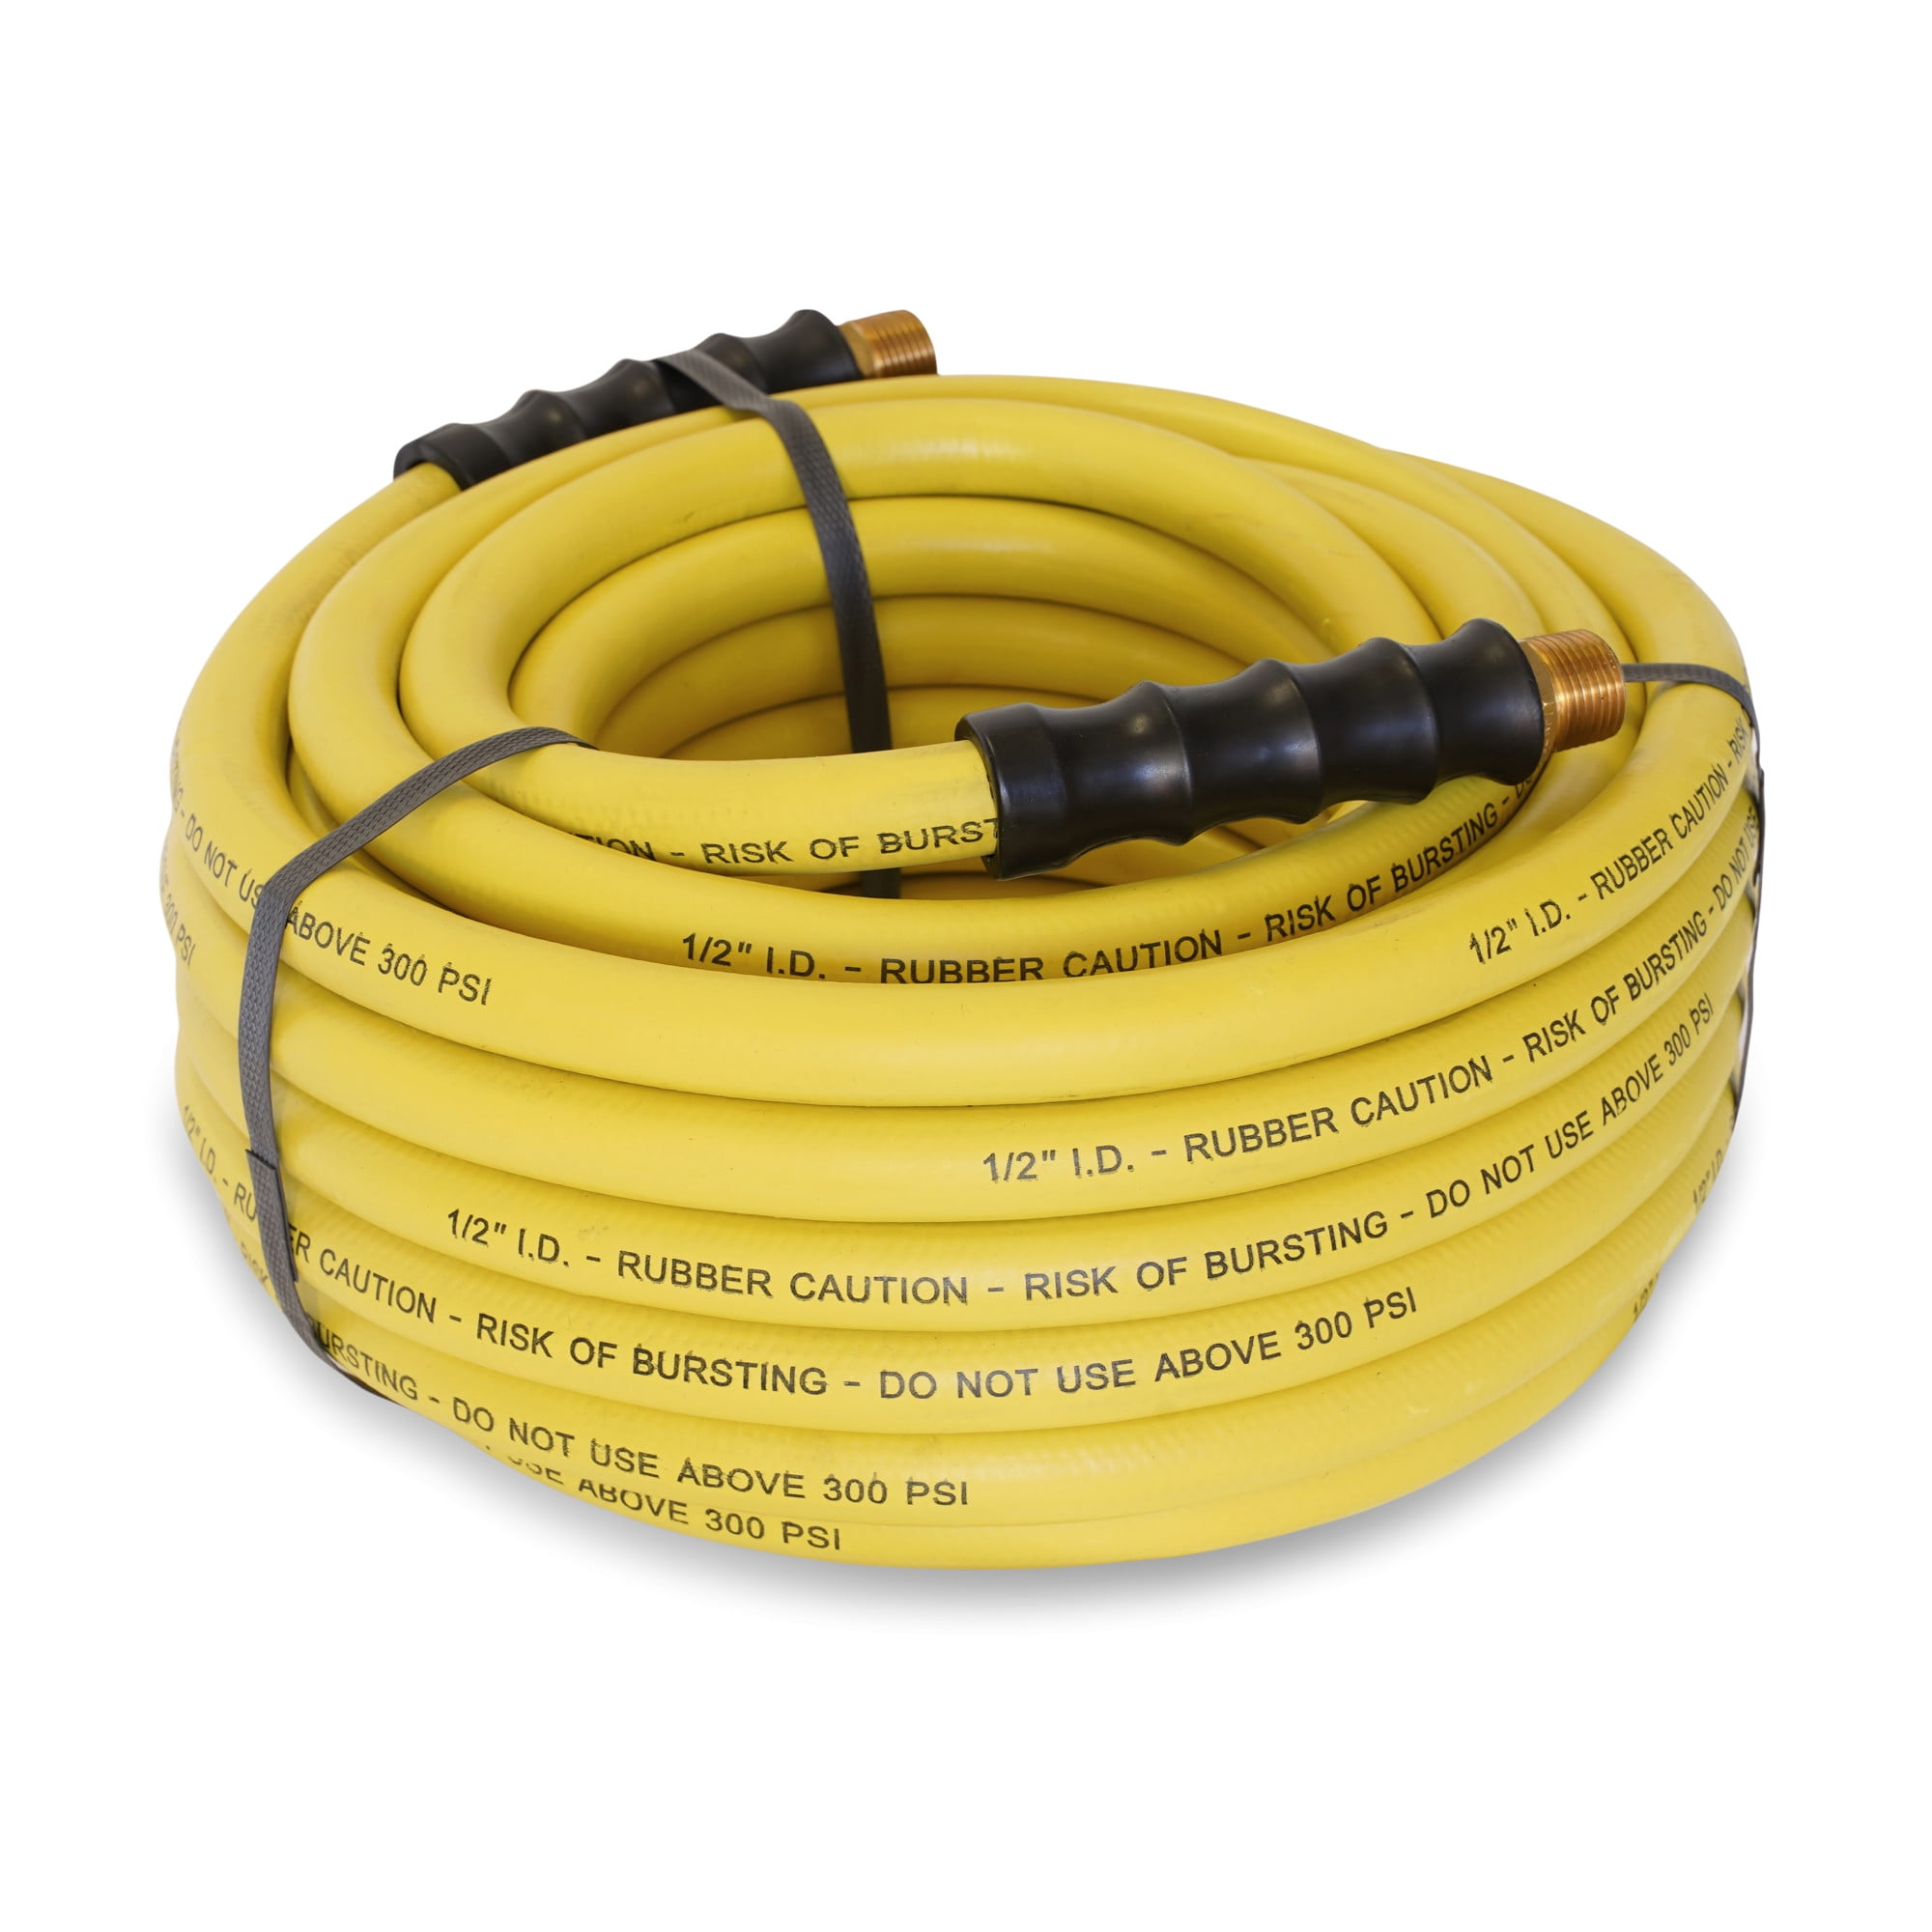 STEELMAN 96846-IND 50-Foot Yellow Air Fittings Water NPT ID Rubber Hose 1/2-Inch Reel 1/2-Inch Replacement with / Long Hose Brass